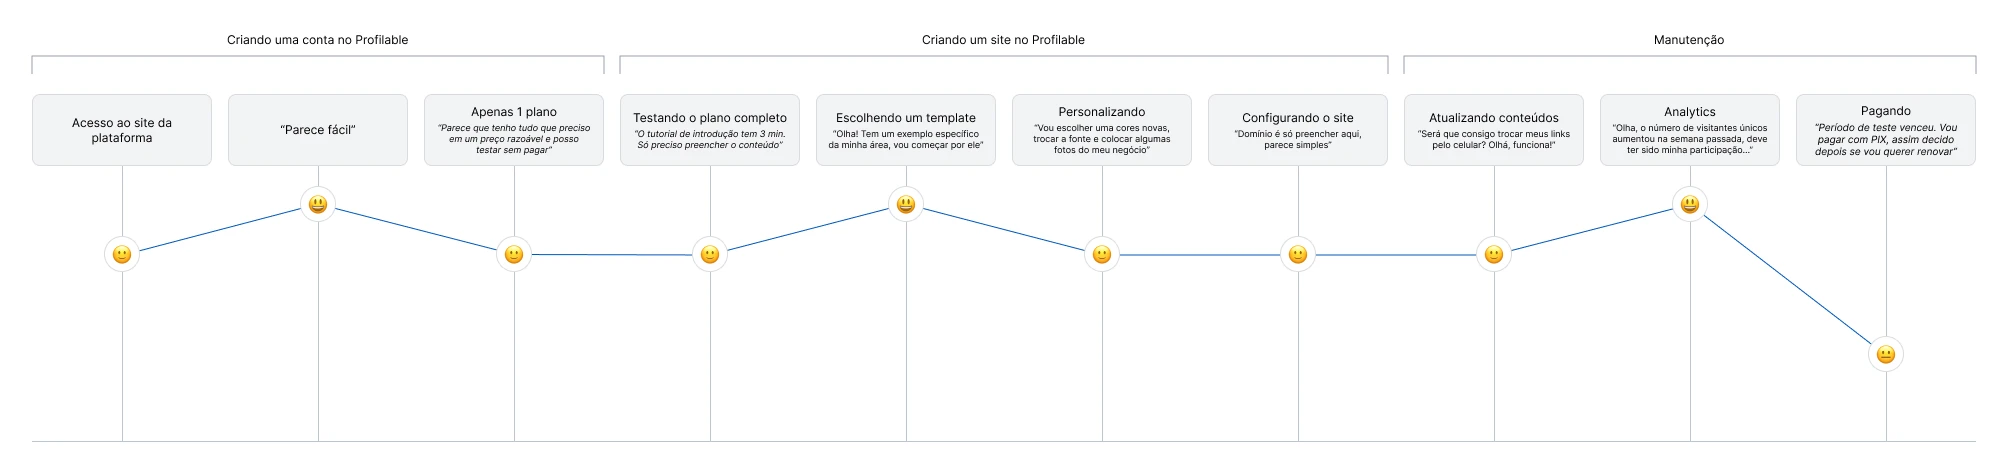 A diagram (written in Portuguese) representing the imagined user's journey on Profilable.